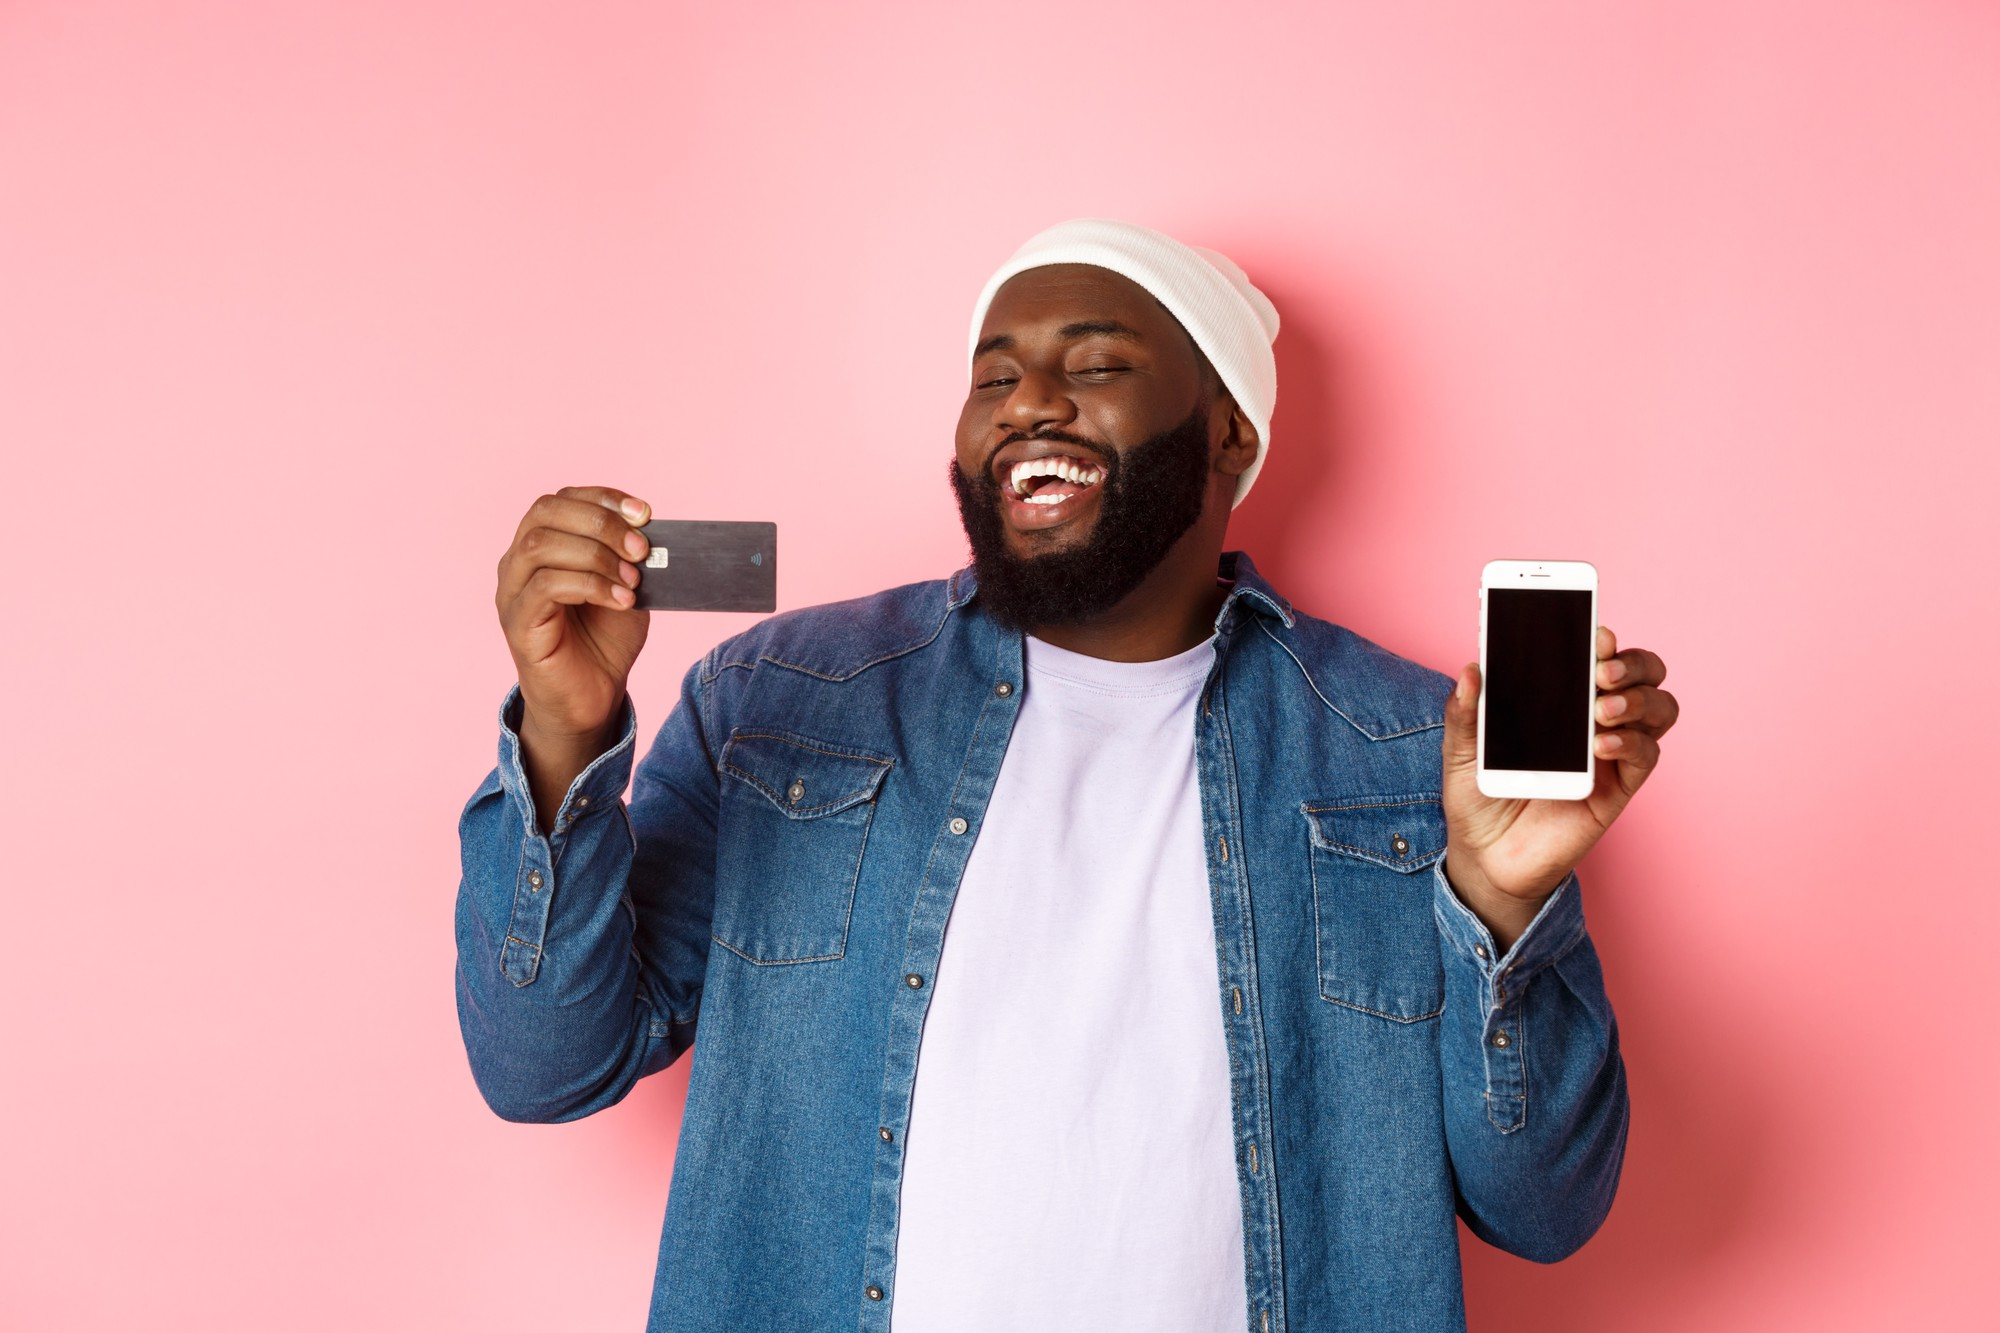 happy man holding credit card and cell phone smiling